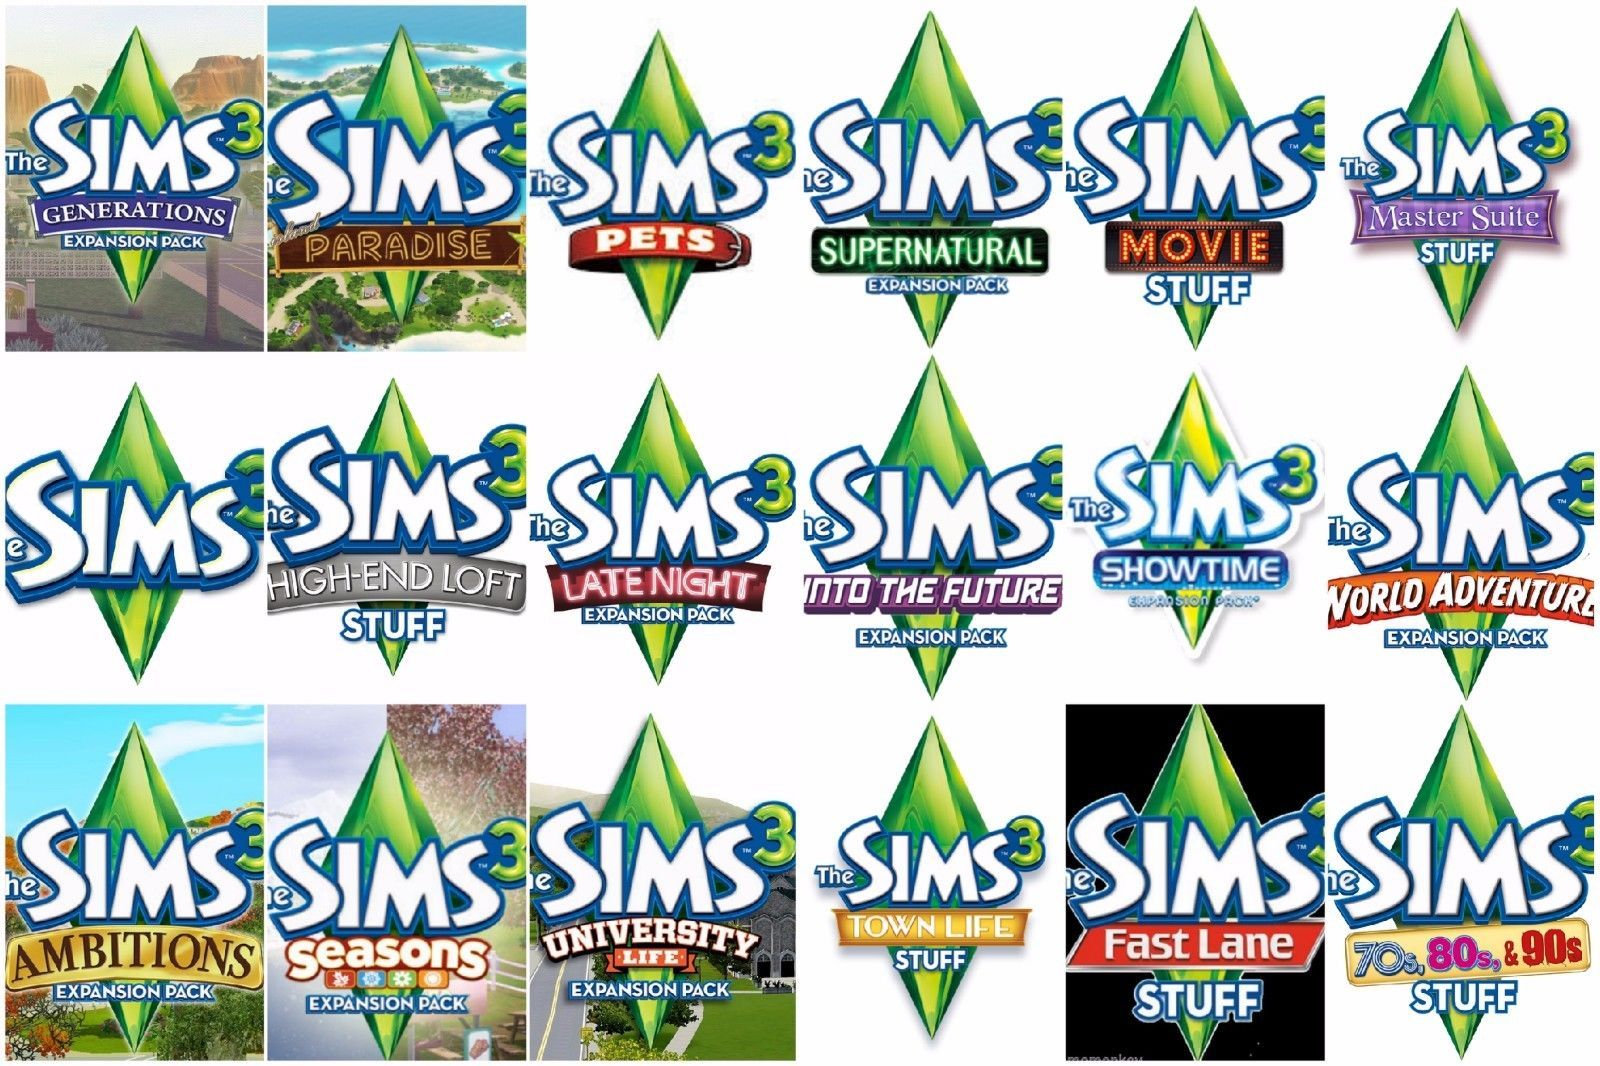 The Sims 3 Expansions and Stuff Packs - Origin Codes ...